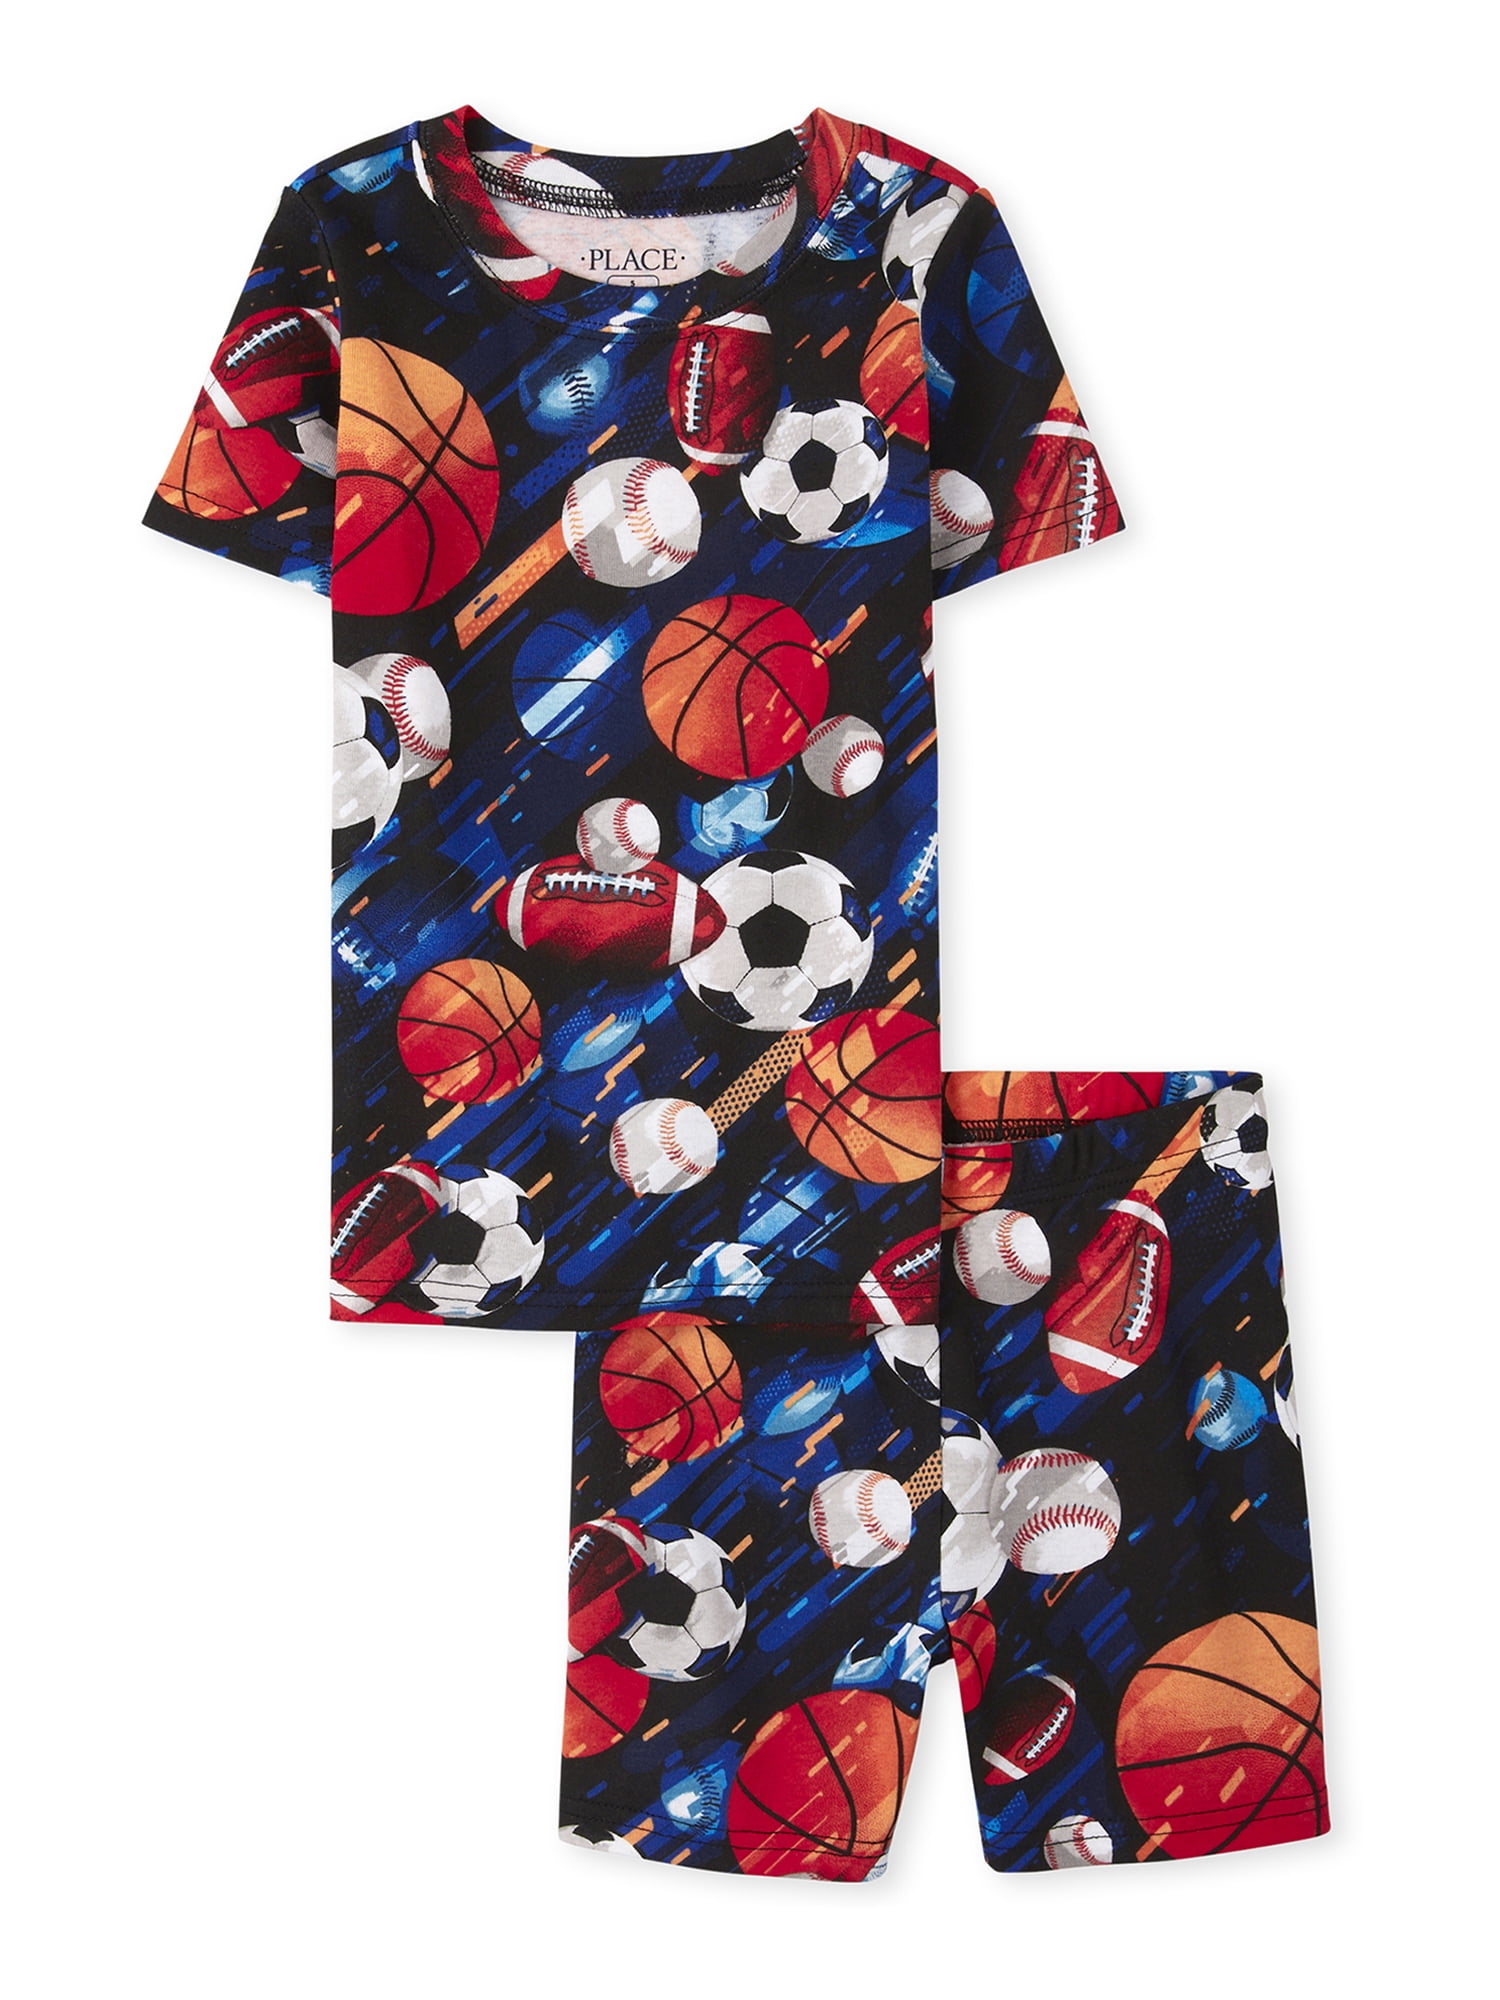 The Children's Place Boys Short Sleeve Solid Pajama Top 